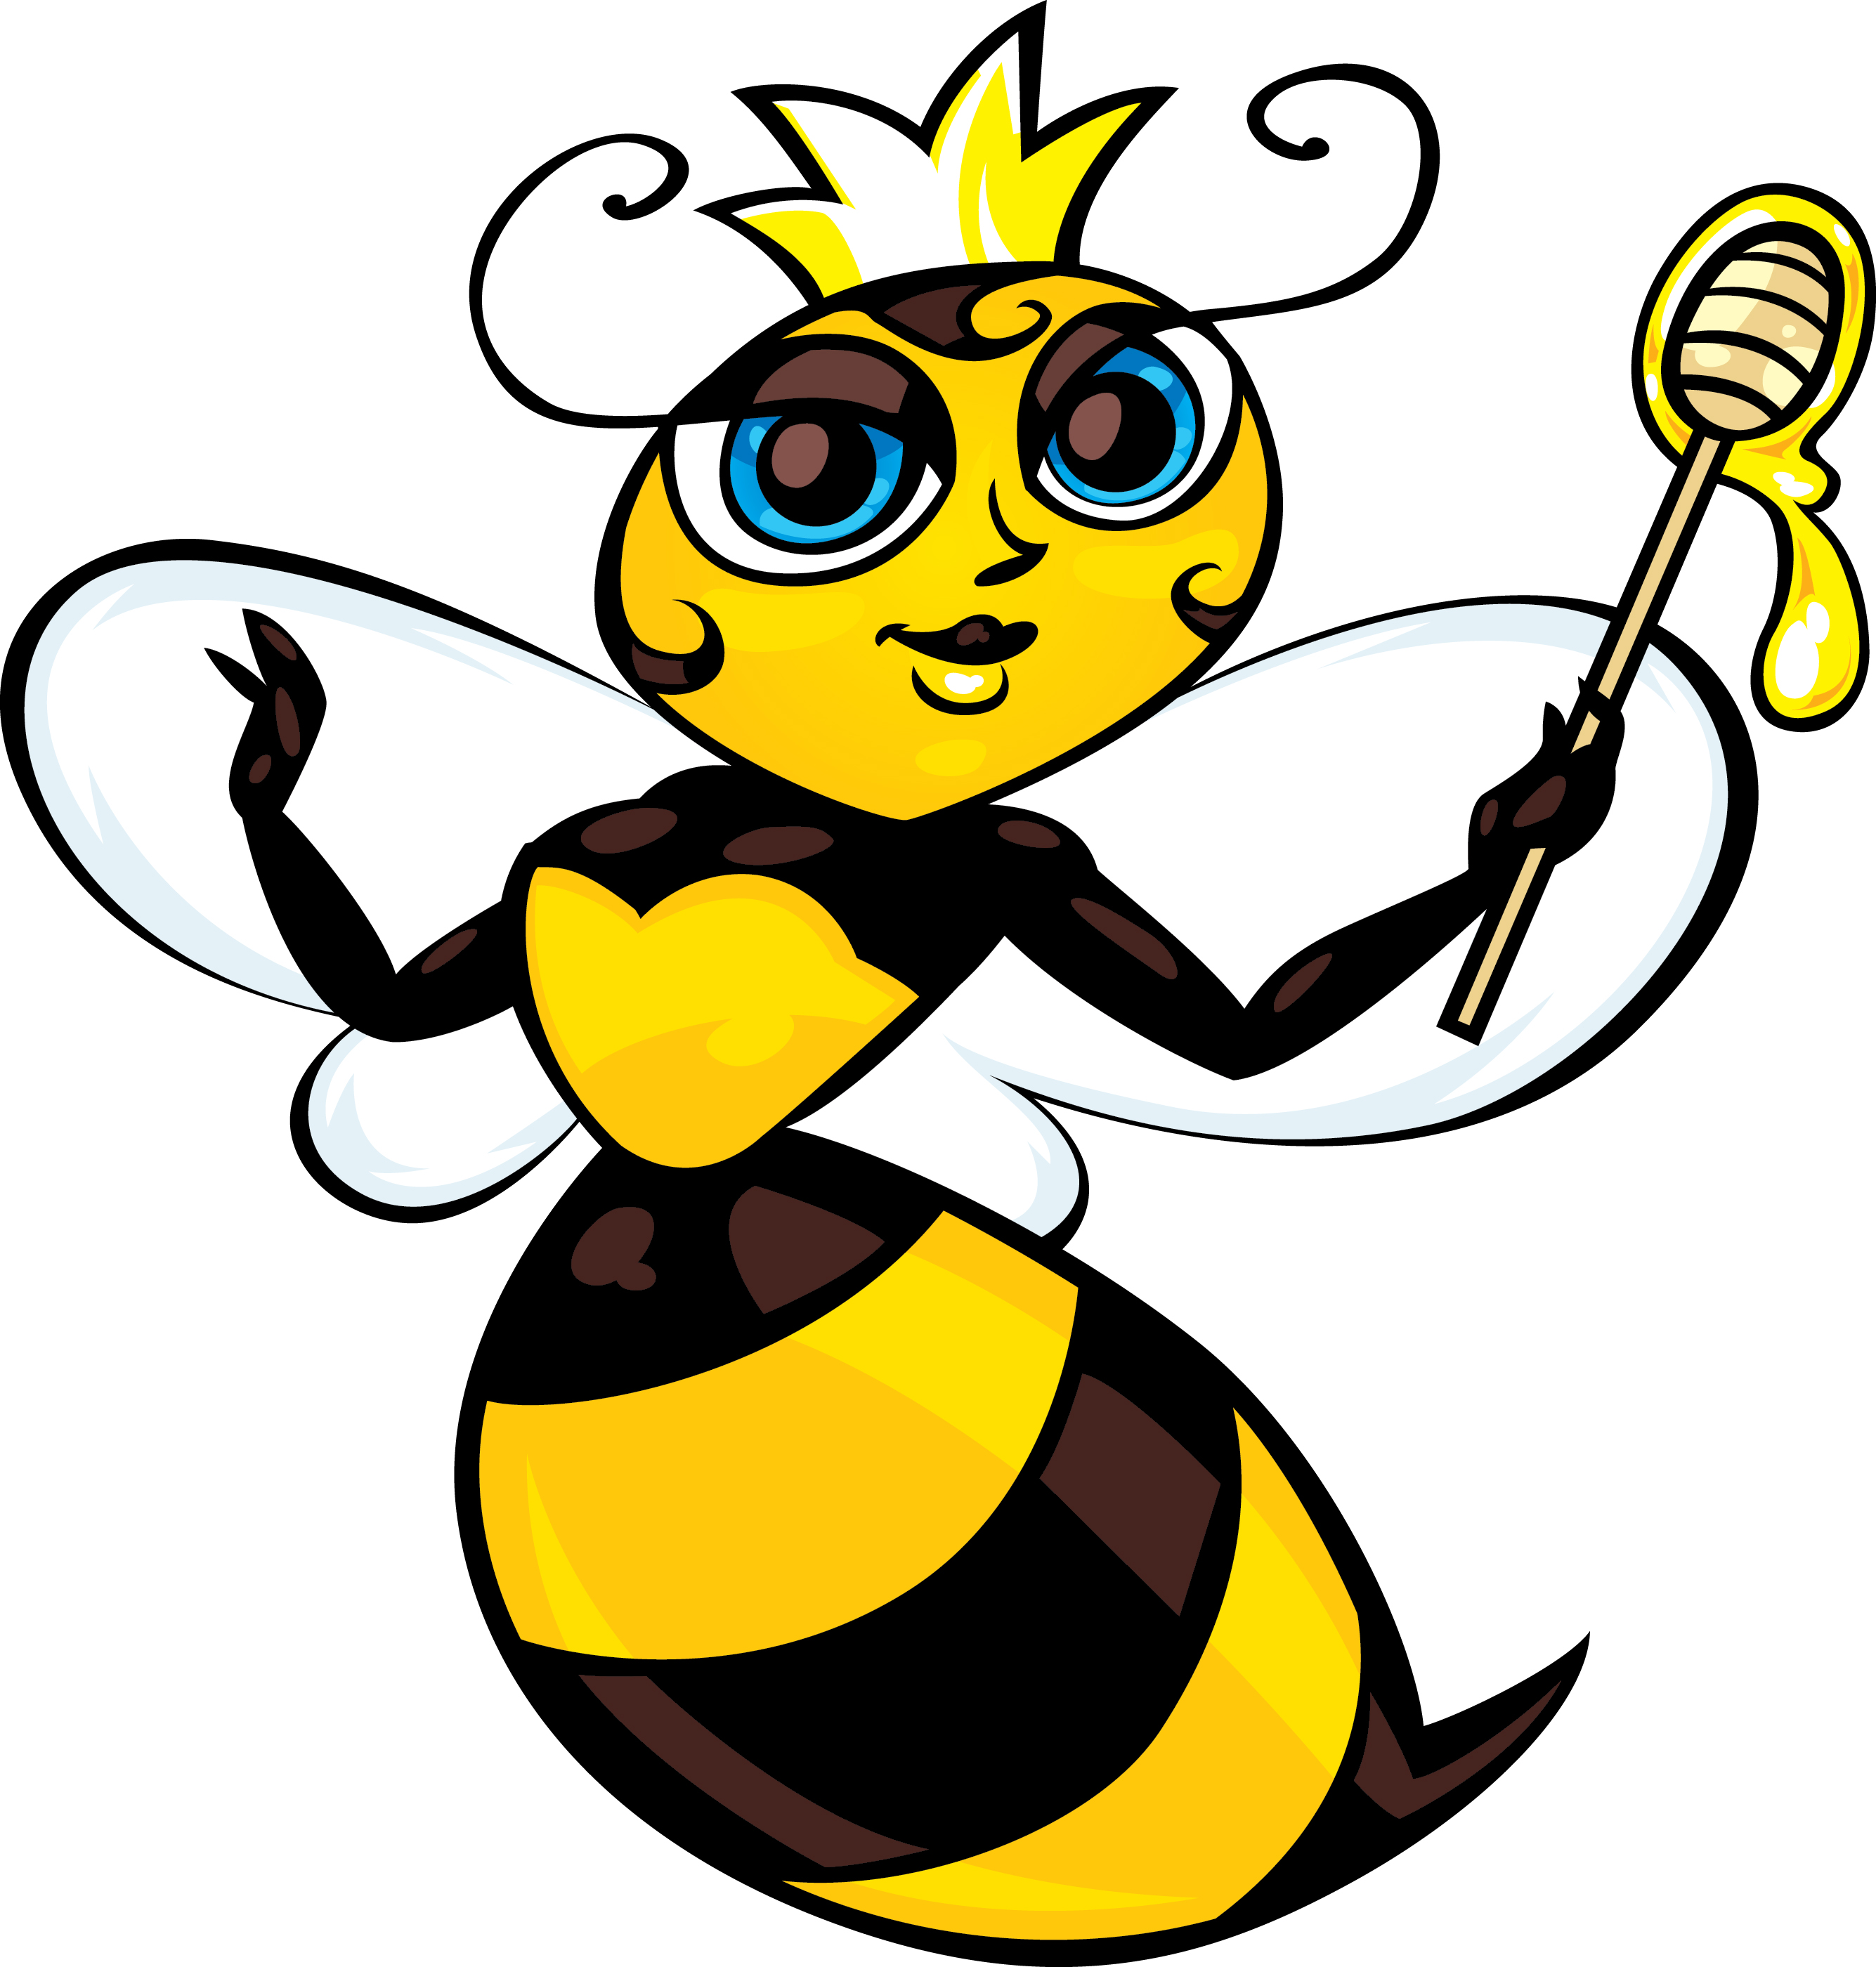 2670x2800 bees honey bee transparent png clipart free download - Bee Drawin...